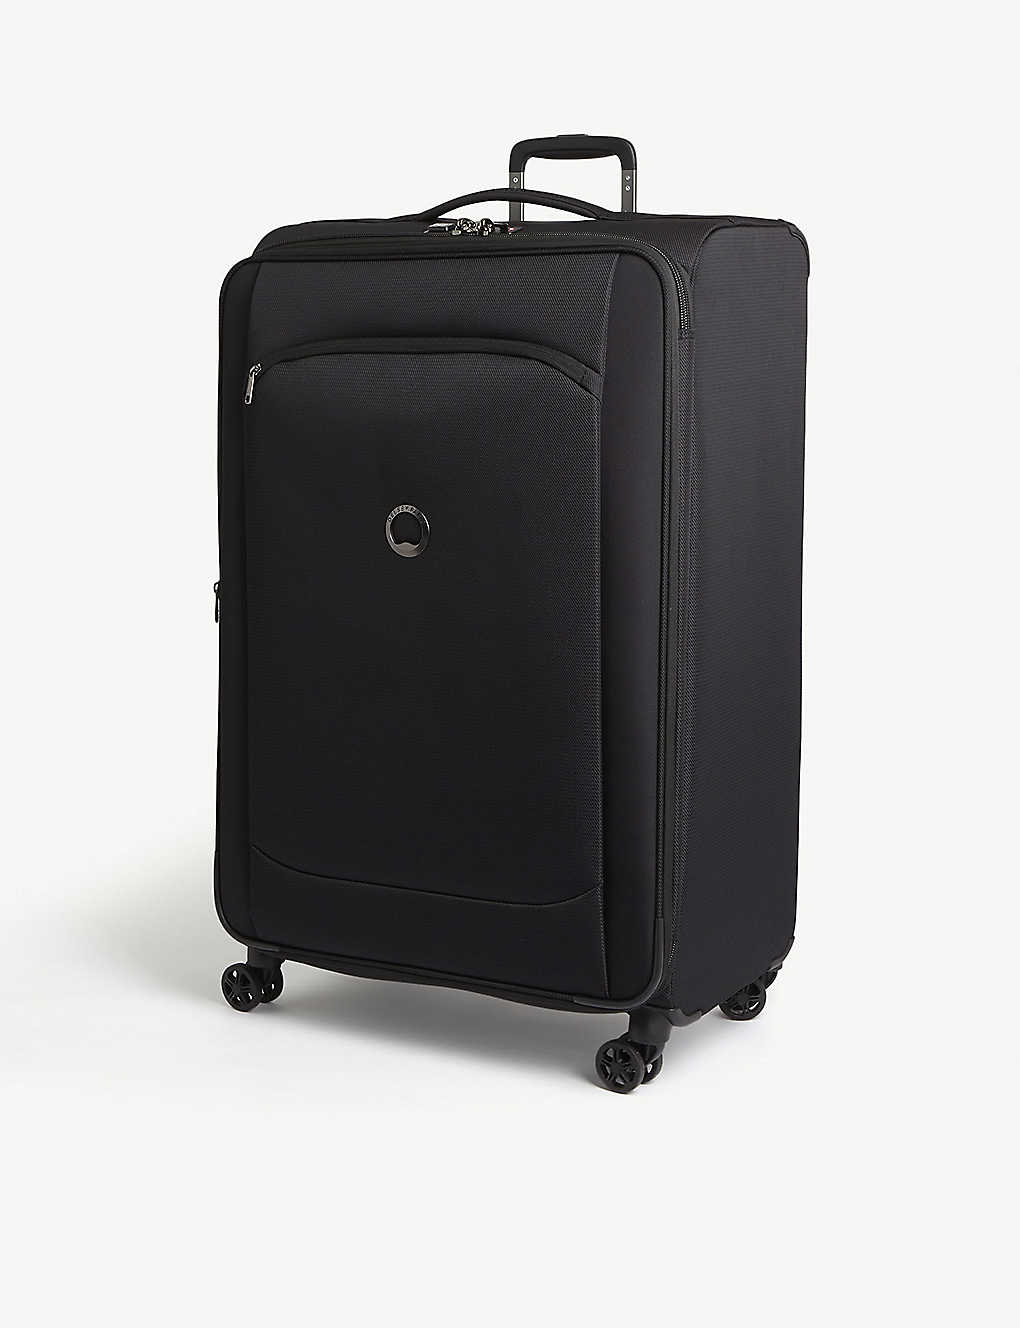 Delsey Montmartre Air 2.0 Four-wheel Recycled Woven Suitcase 83cm In Black